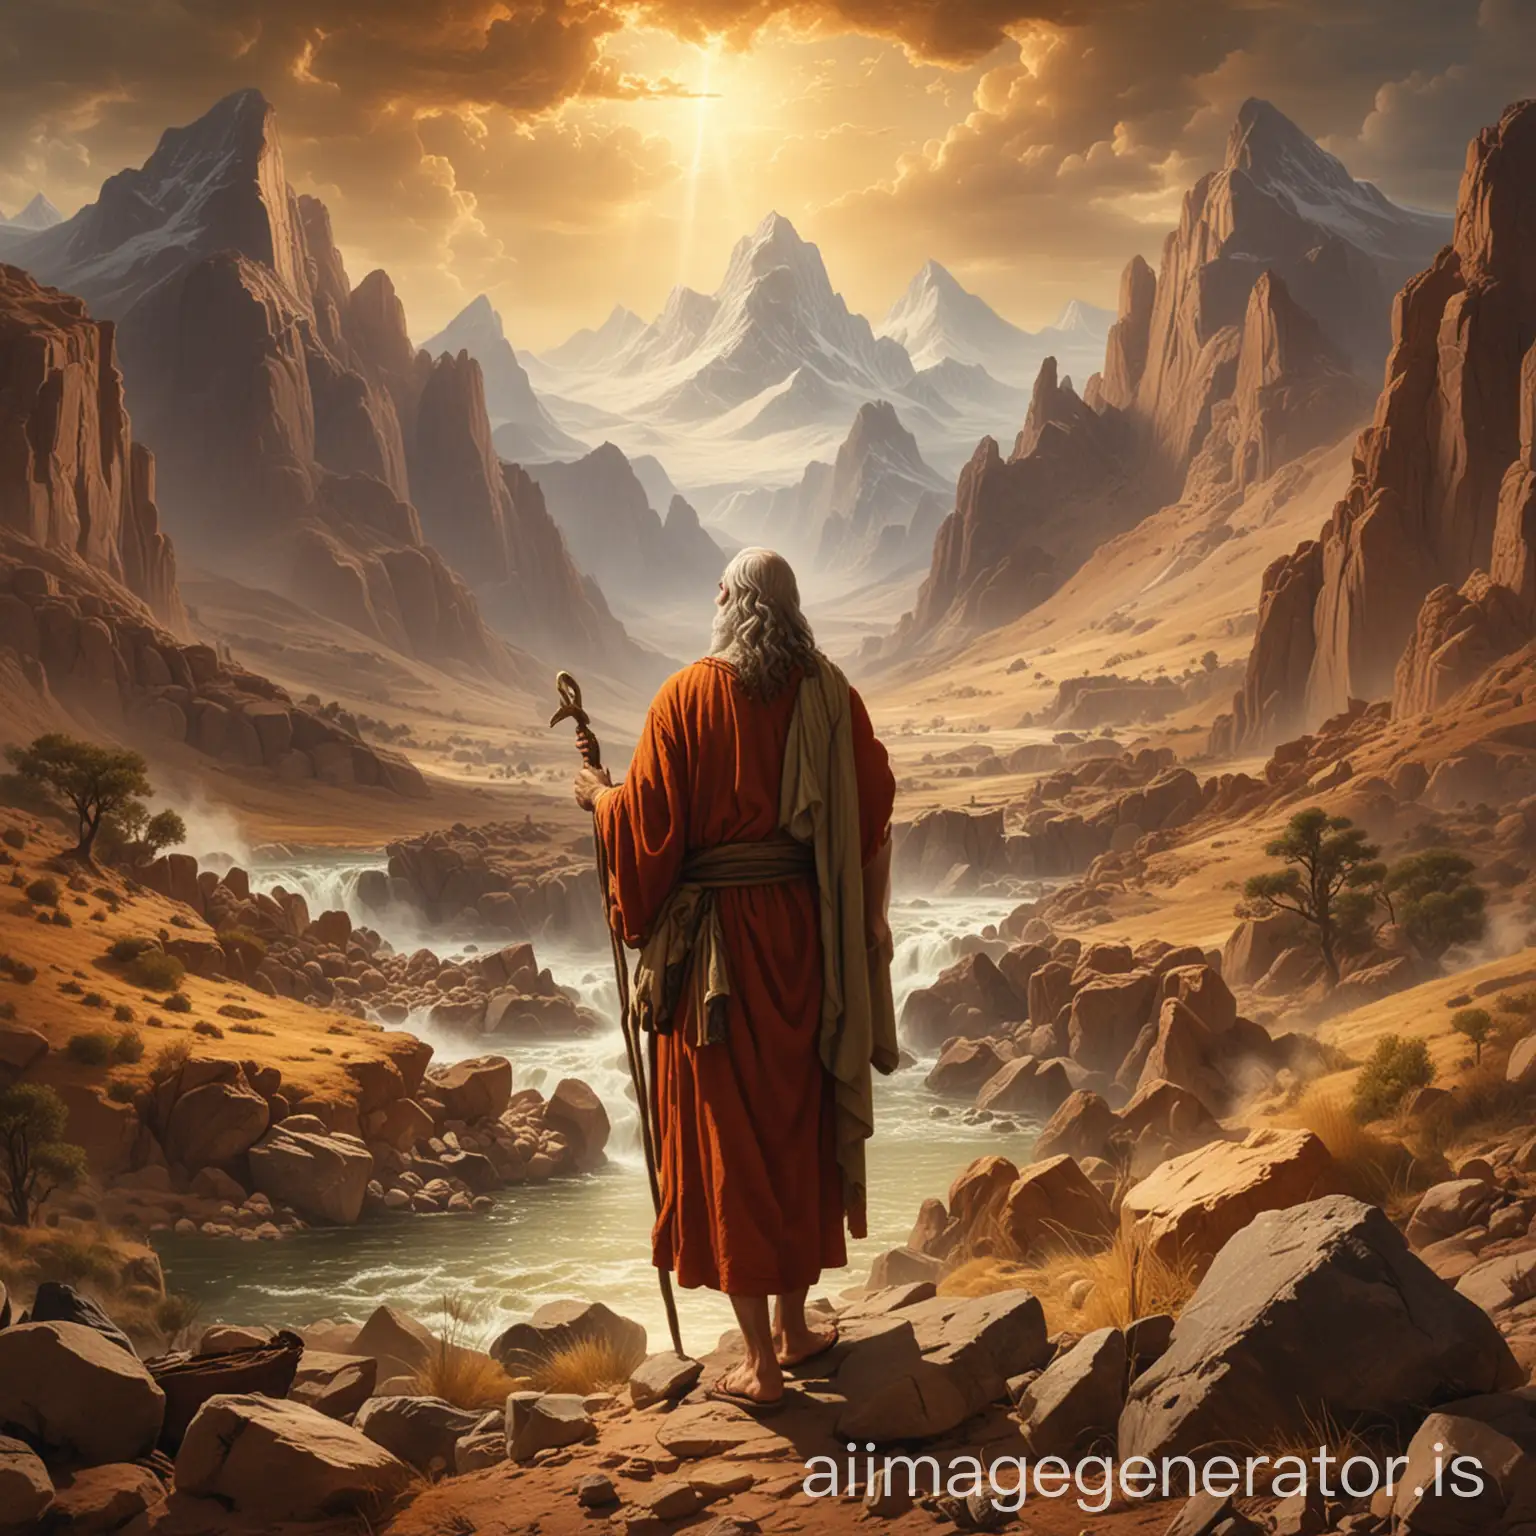 Moses in the wilderness with mountains, warm picture